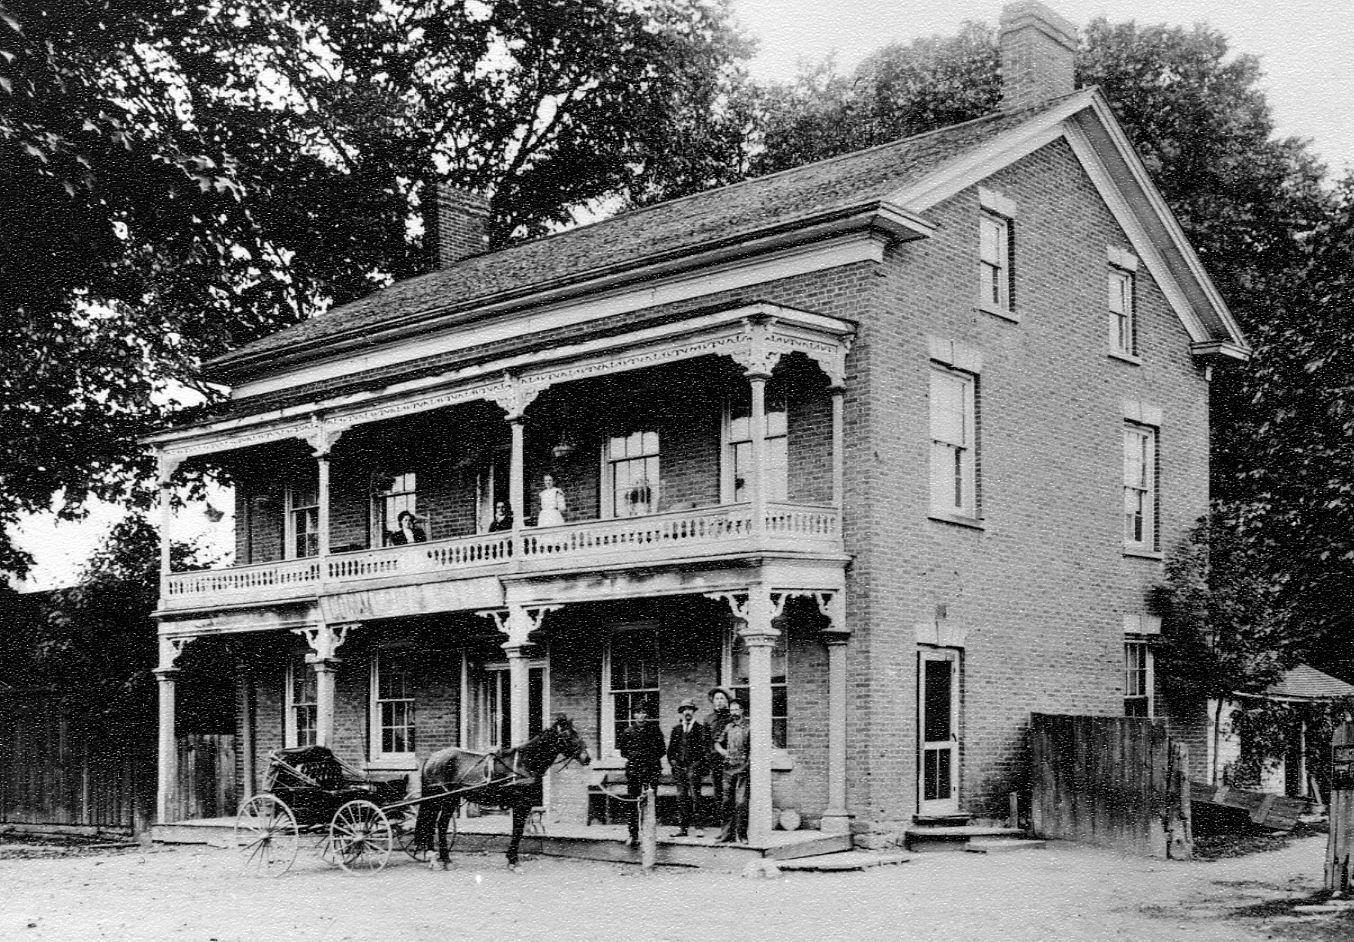 Commercial Hotel, c1900